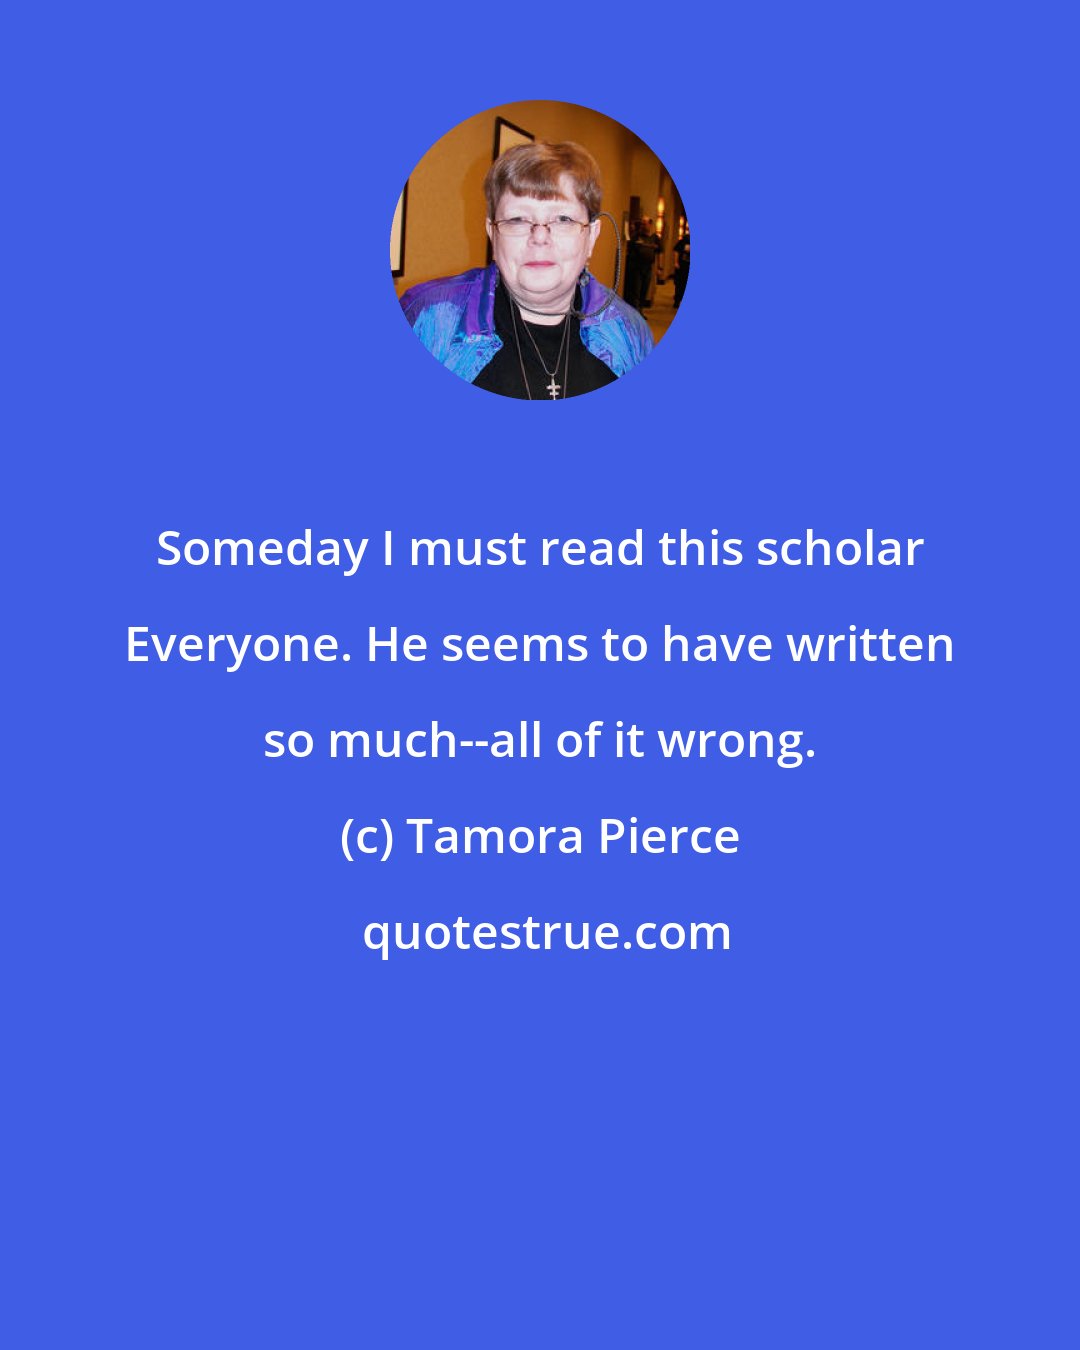 Tamora Pierce: Someday I must read this scholar Everyone. He seems to have written so much--all of it wrong.